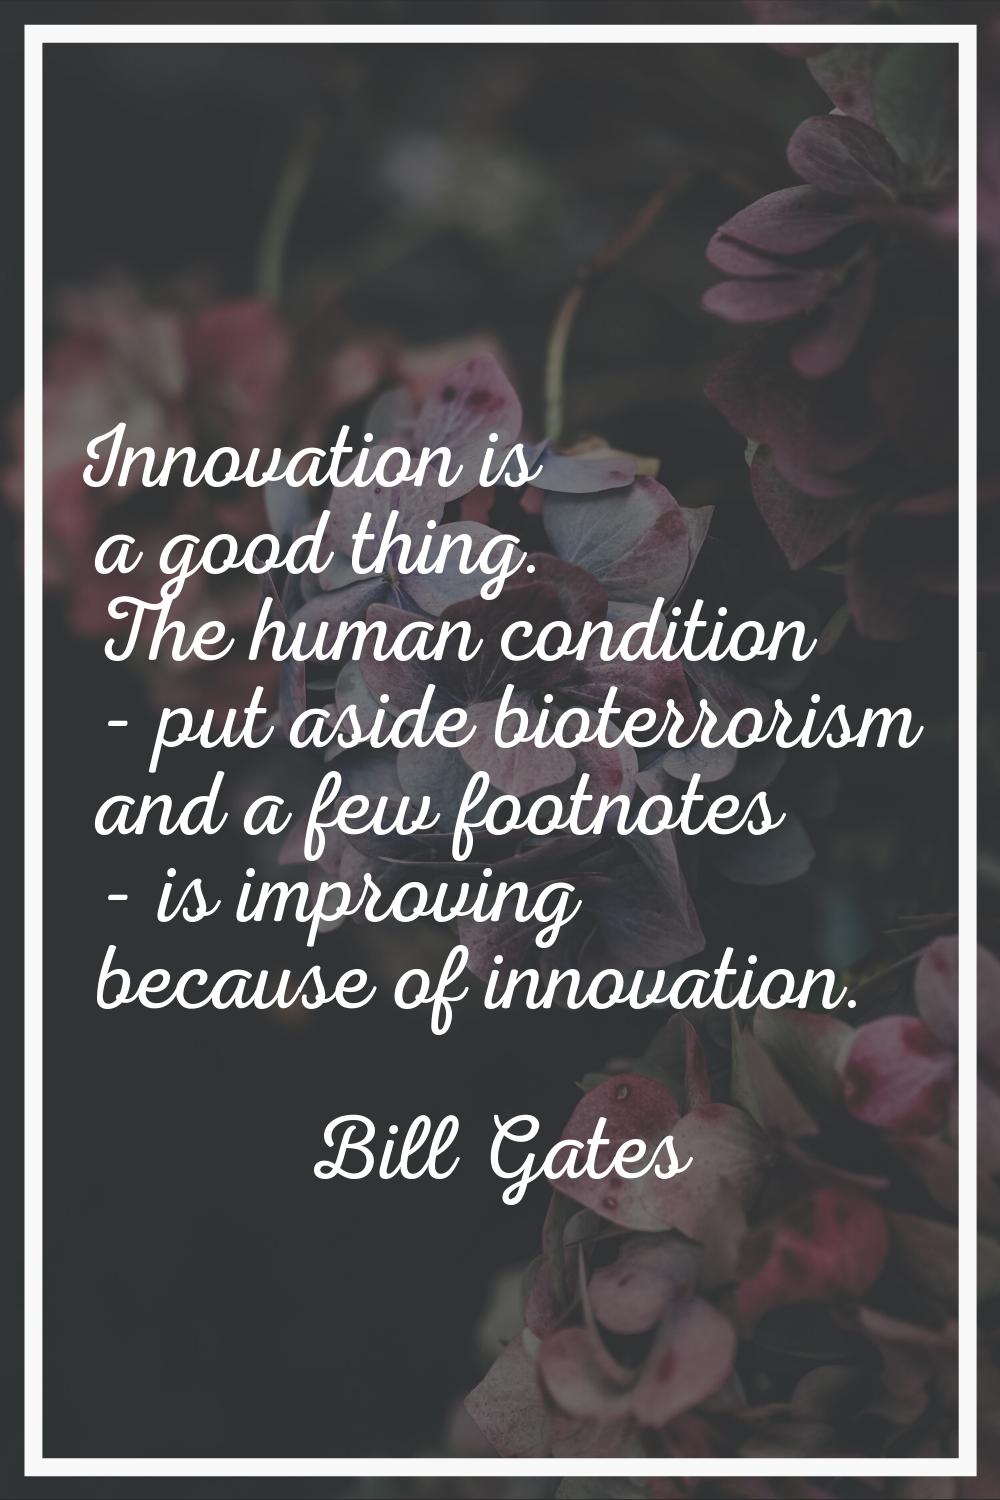 Innovation is a good thing. The human condition - put aside bioterrorism and a few footnotes - is i